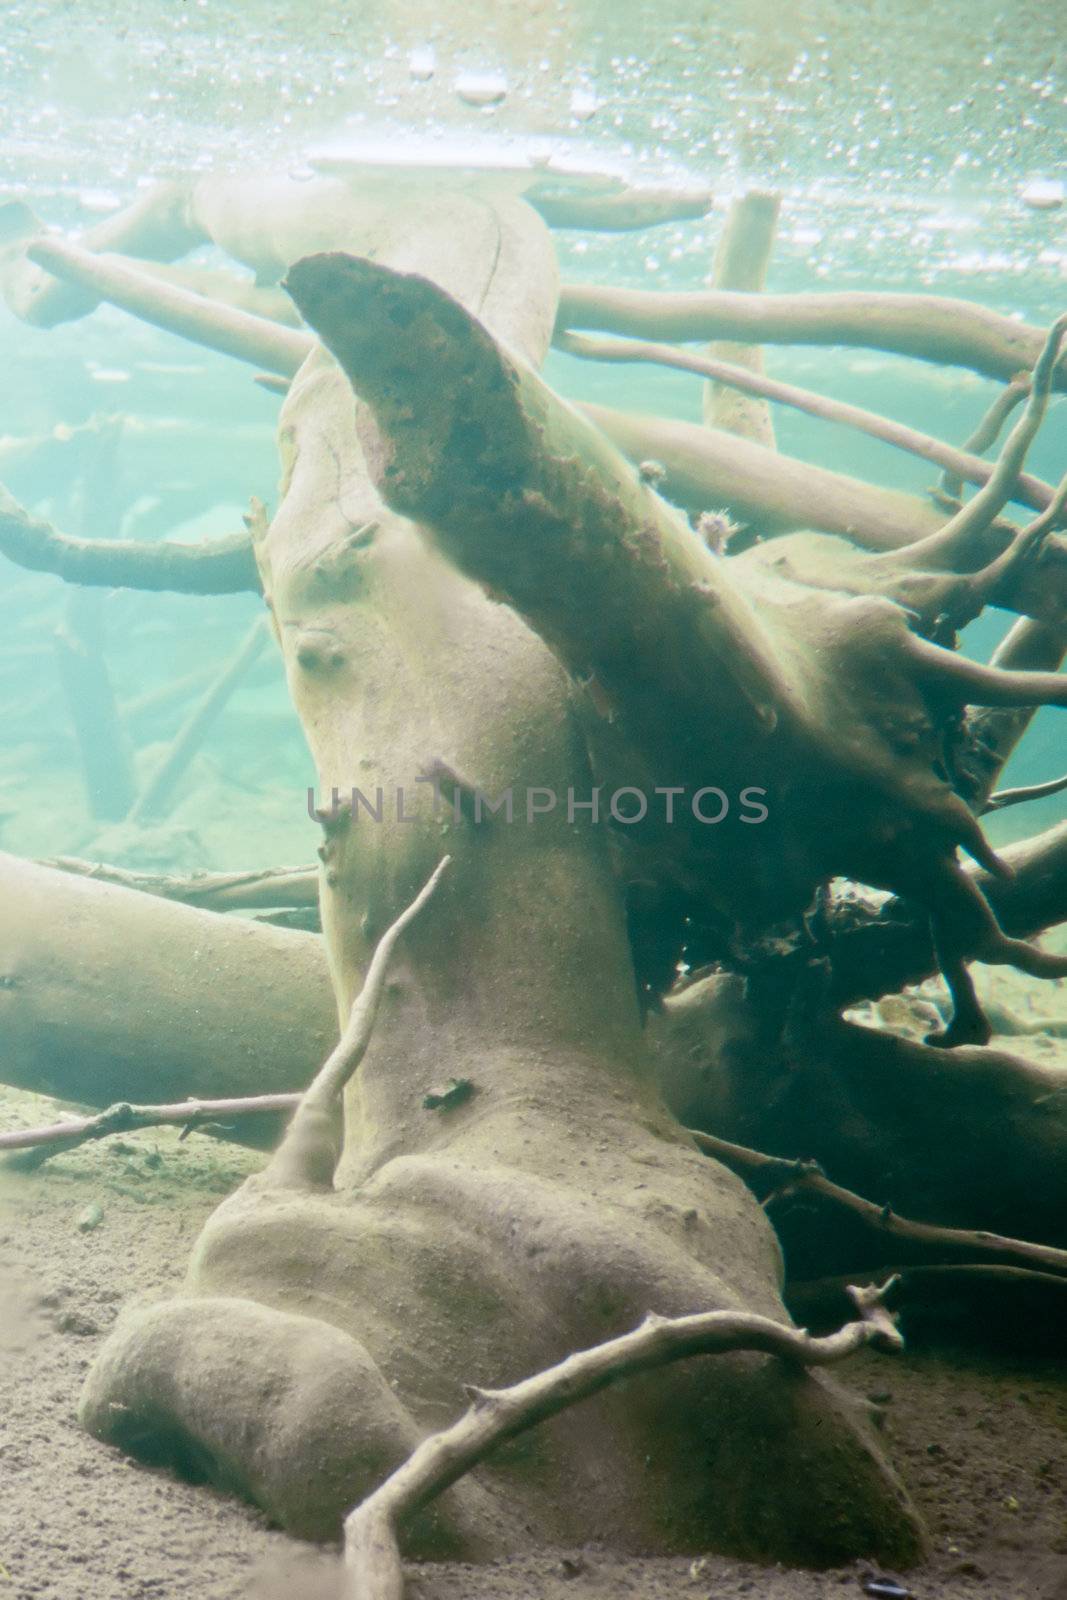 Underwater shot in frozen beaver pond with sunken wood and underside of thick layer of ice